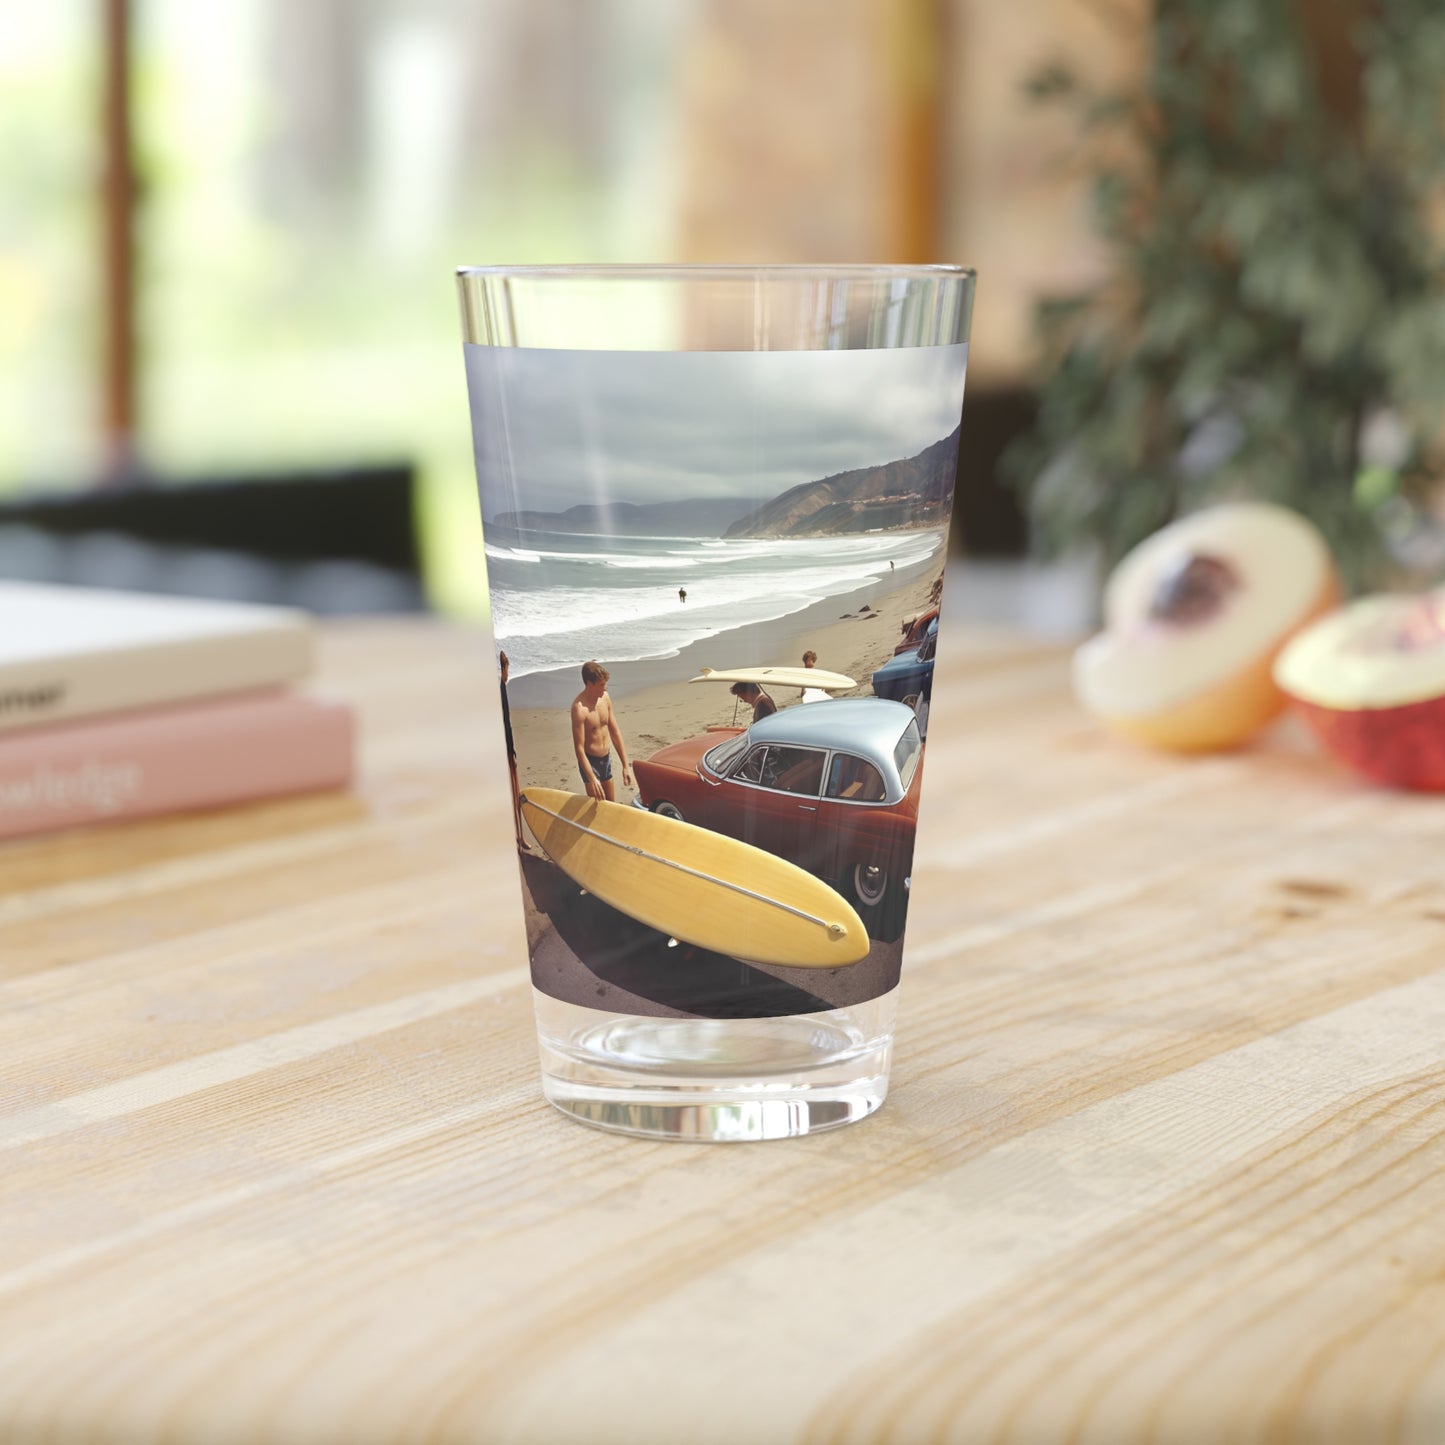 Step into the golden era of surfing with our Design #023 Malibu California 1958 Surf Spot Pint Glass. Your glassware, your slice of surf history, exclusively at Stashbox.ai.